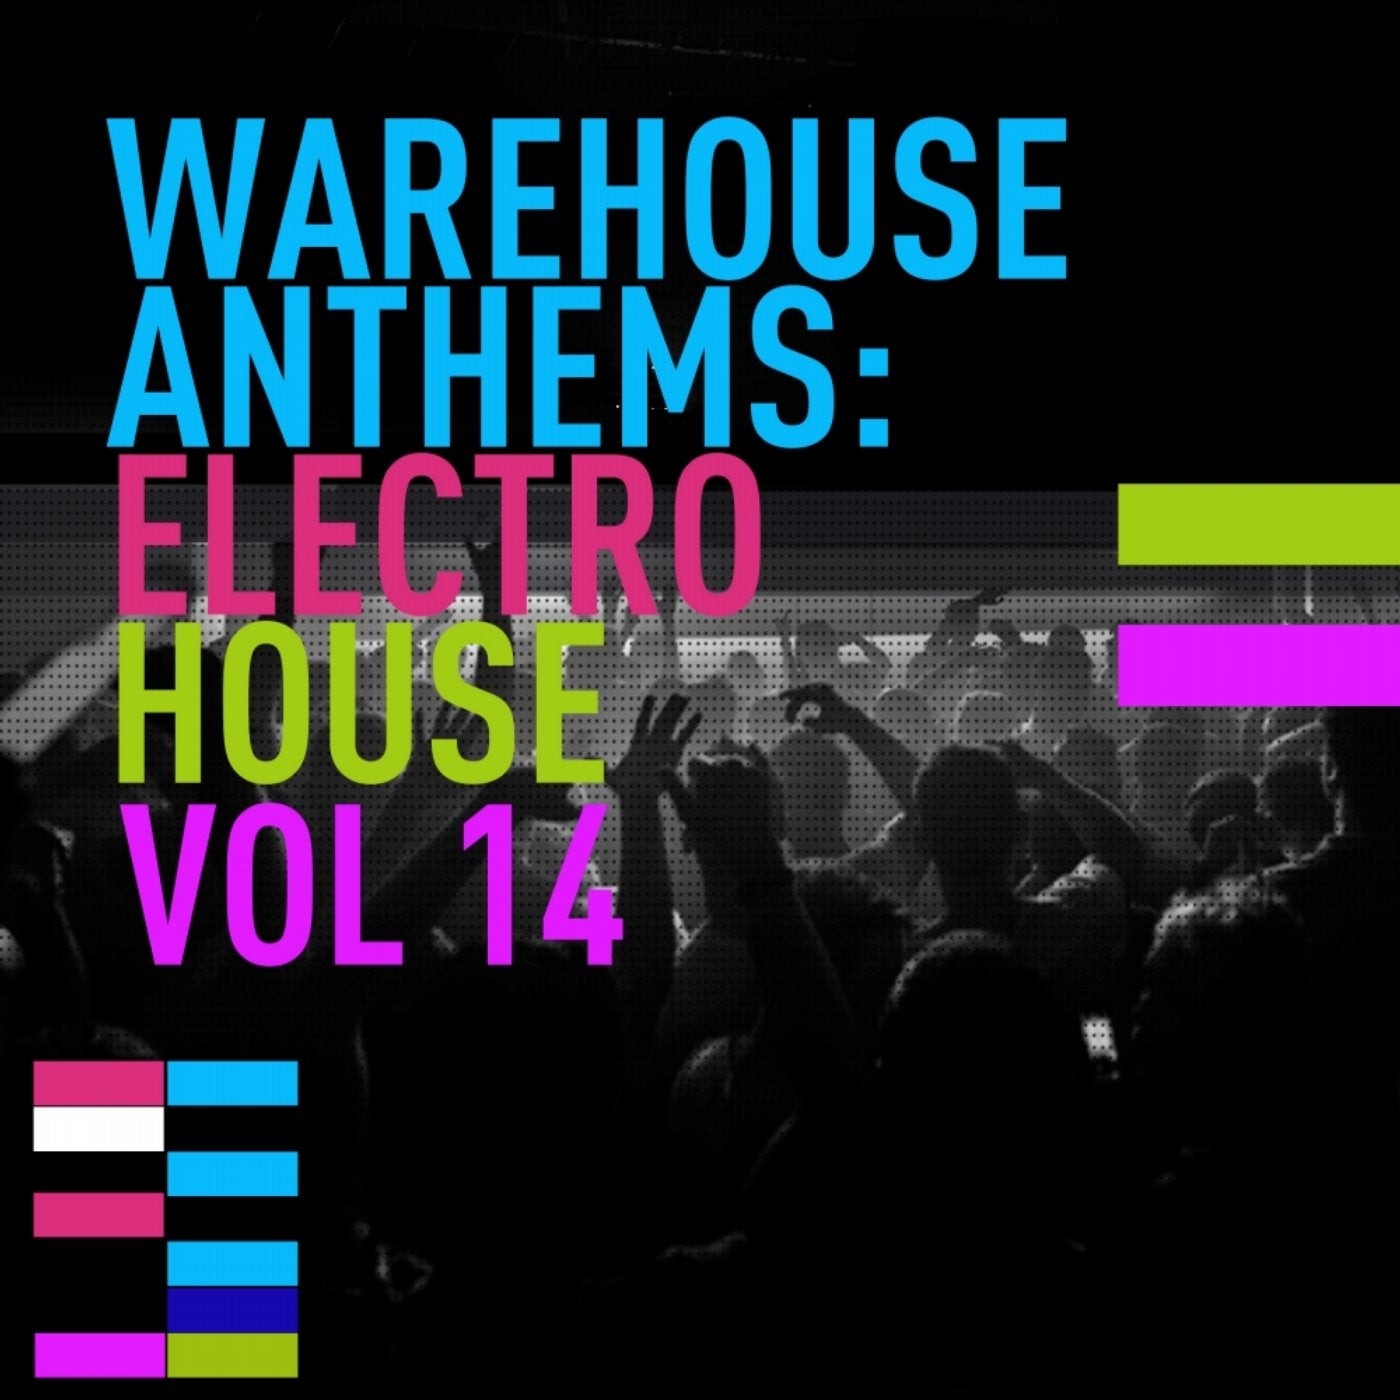 Warehouse Anthems: Electro House Vol. 14